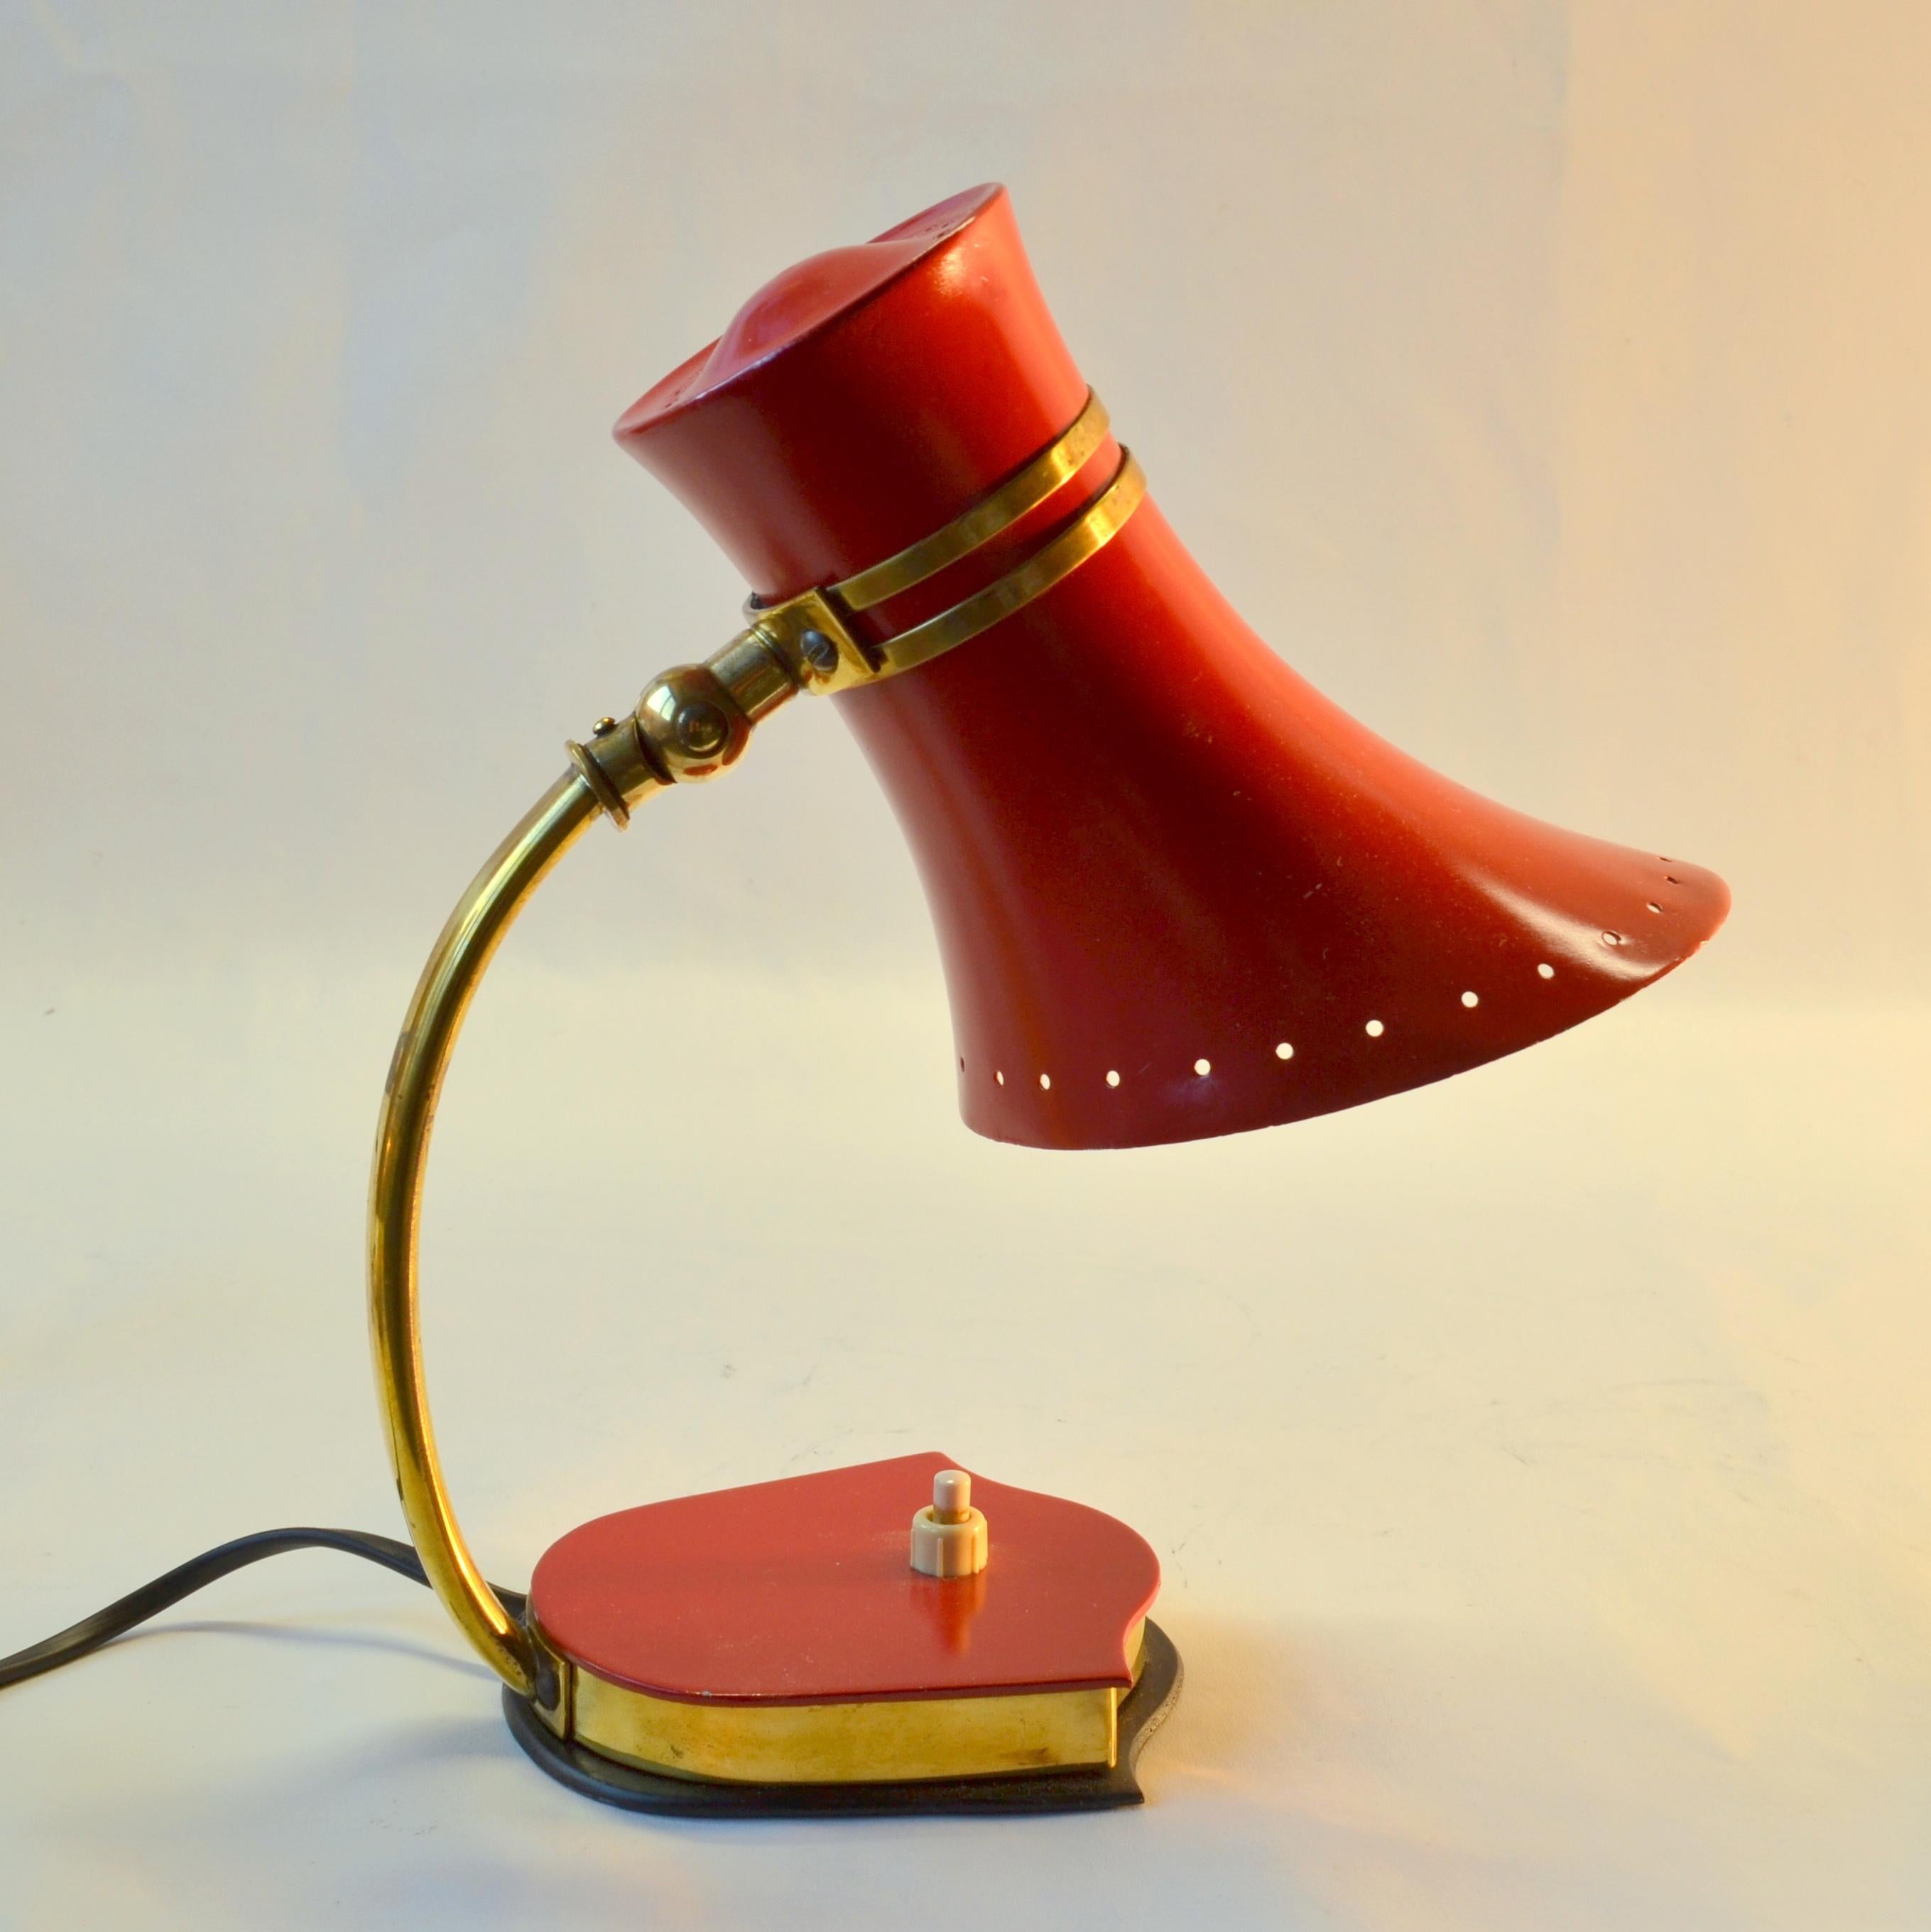 Pair of original by Stilnovo Mid-Century Modern Italian red & yellow enameled aluminum & brass bell shape table lamps with adjustable joints to angle the light source. These Italian enameled  were produced in the 1950's-1960's and are vintage in